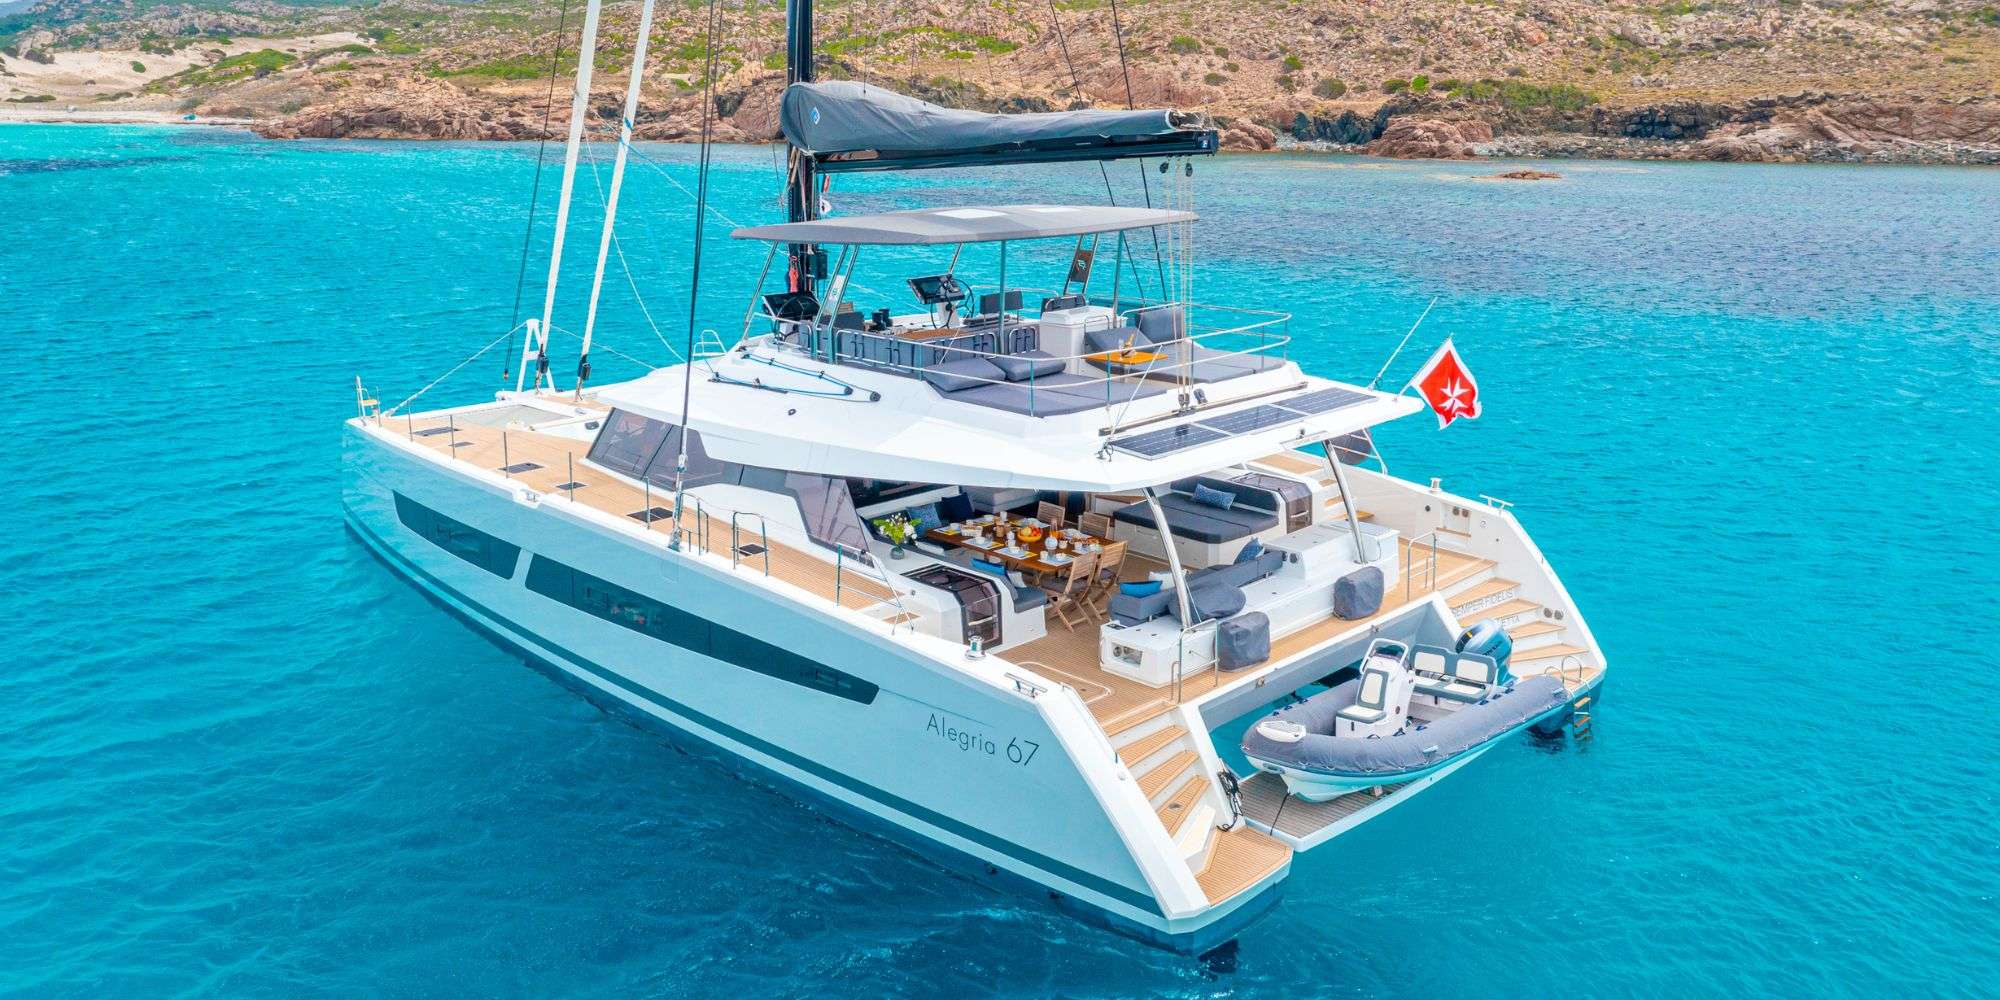 SEMPER FIDELIS - Luxury yacht charter St Vincent and the Grenadines & Boat hire in Bahamas & Caribbean 2